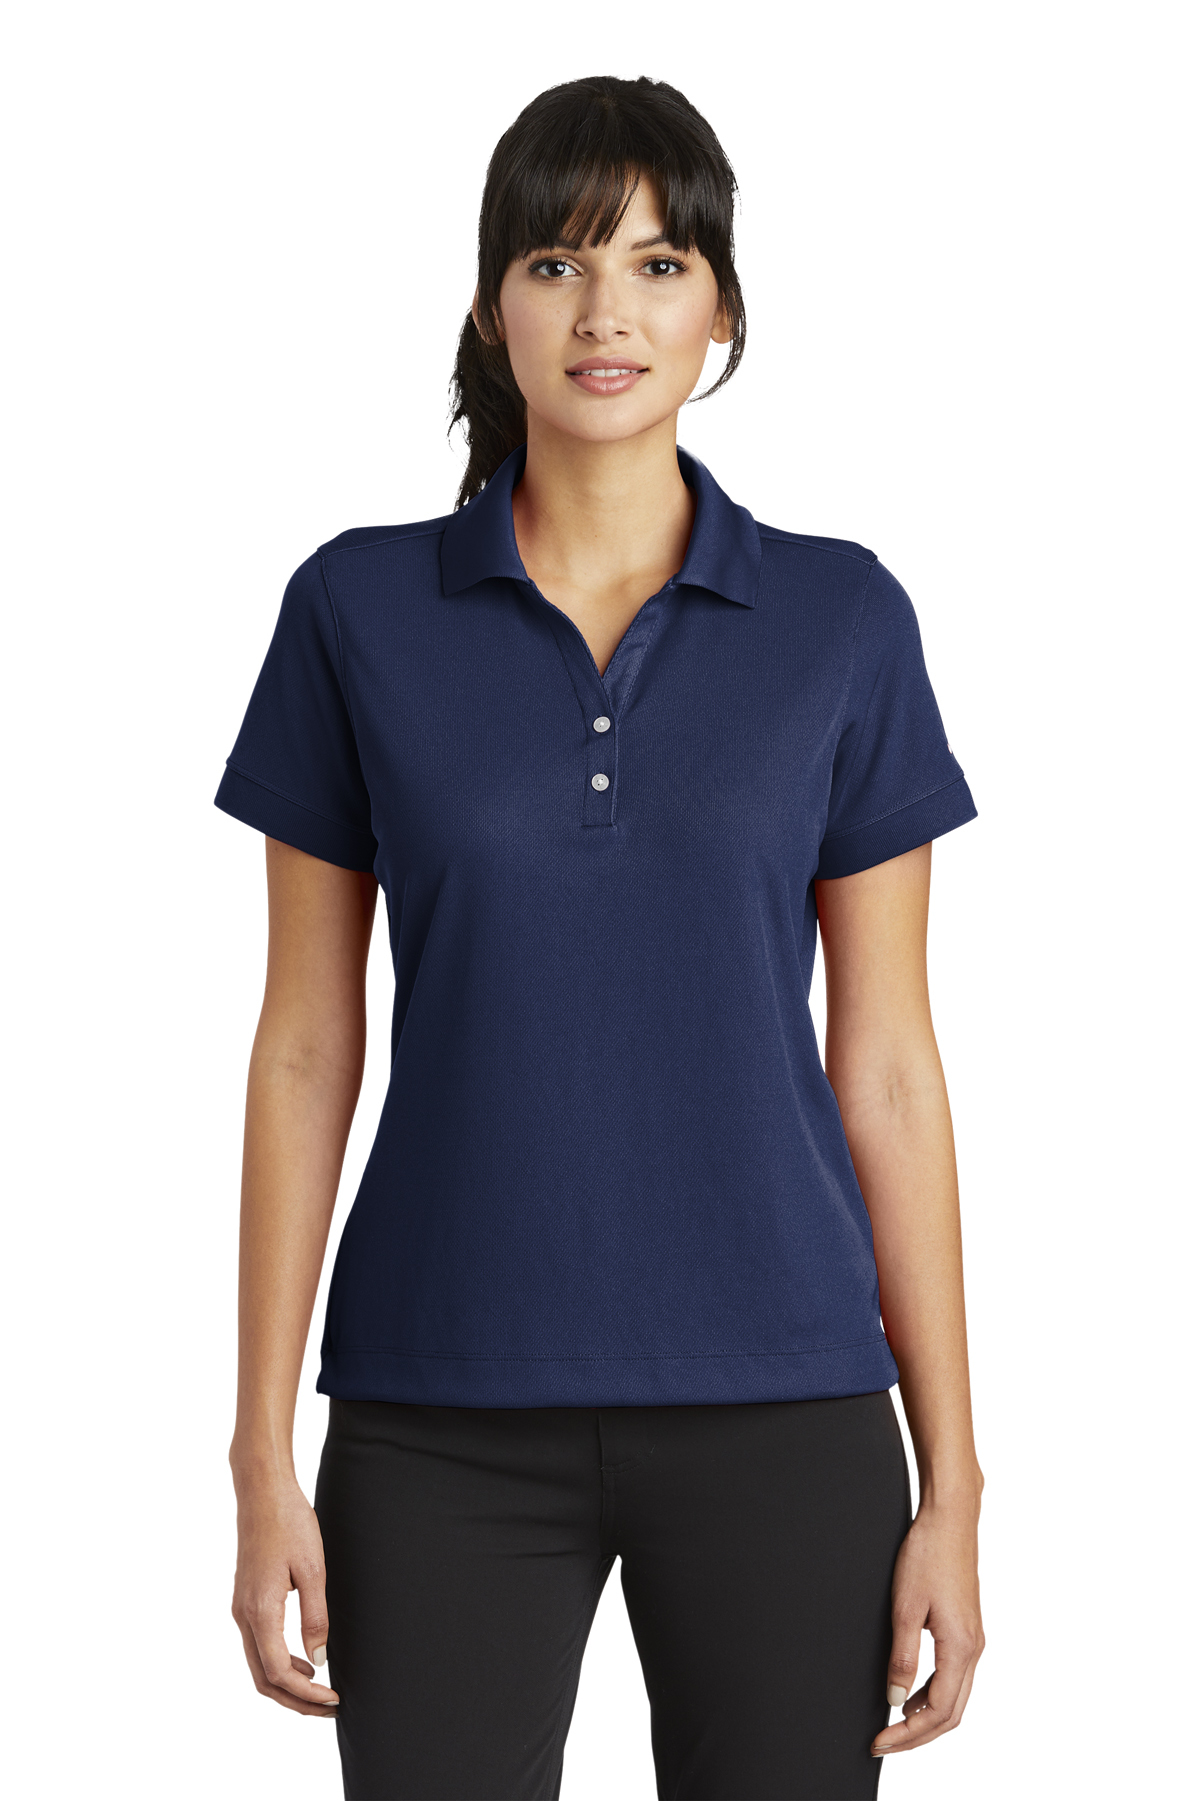 Nike Ladies Dri-FIT Classic Polo | Product | Company Casuals